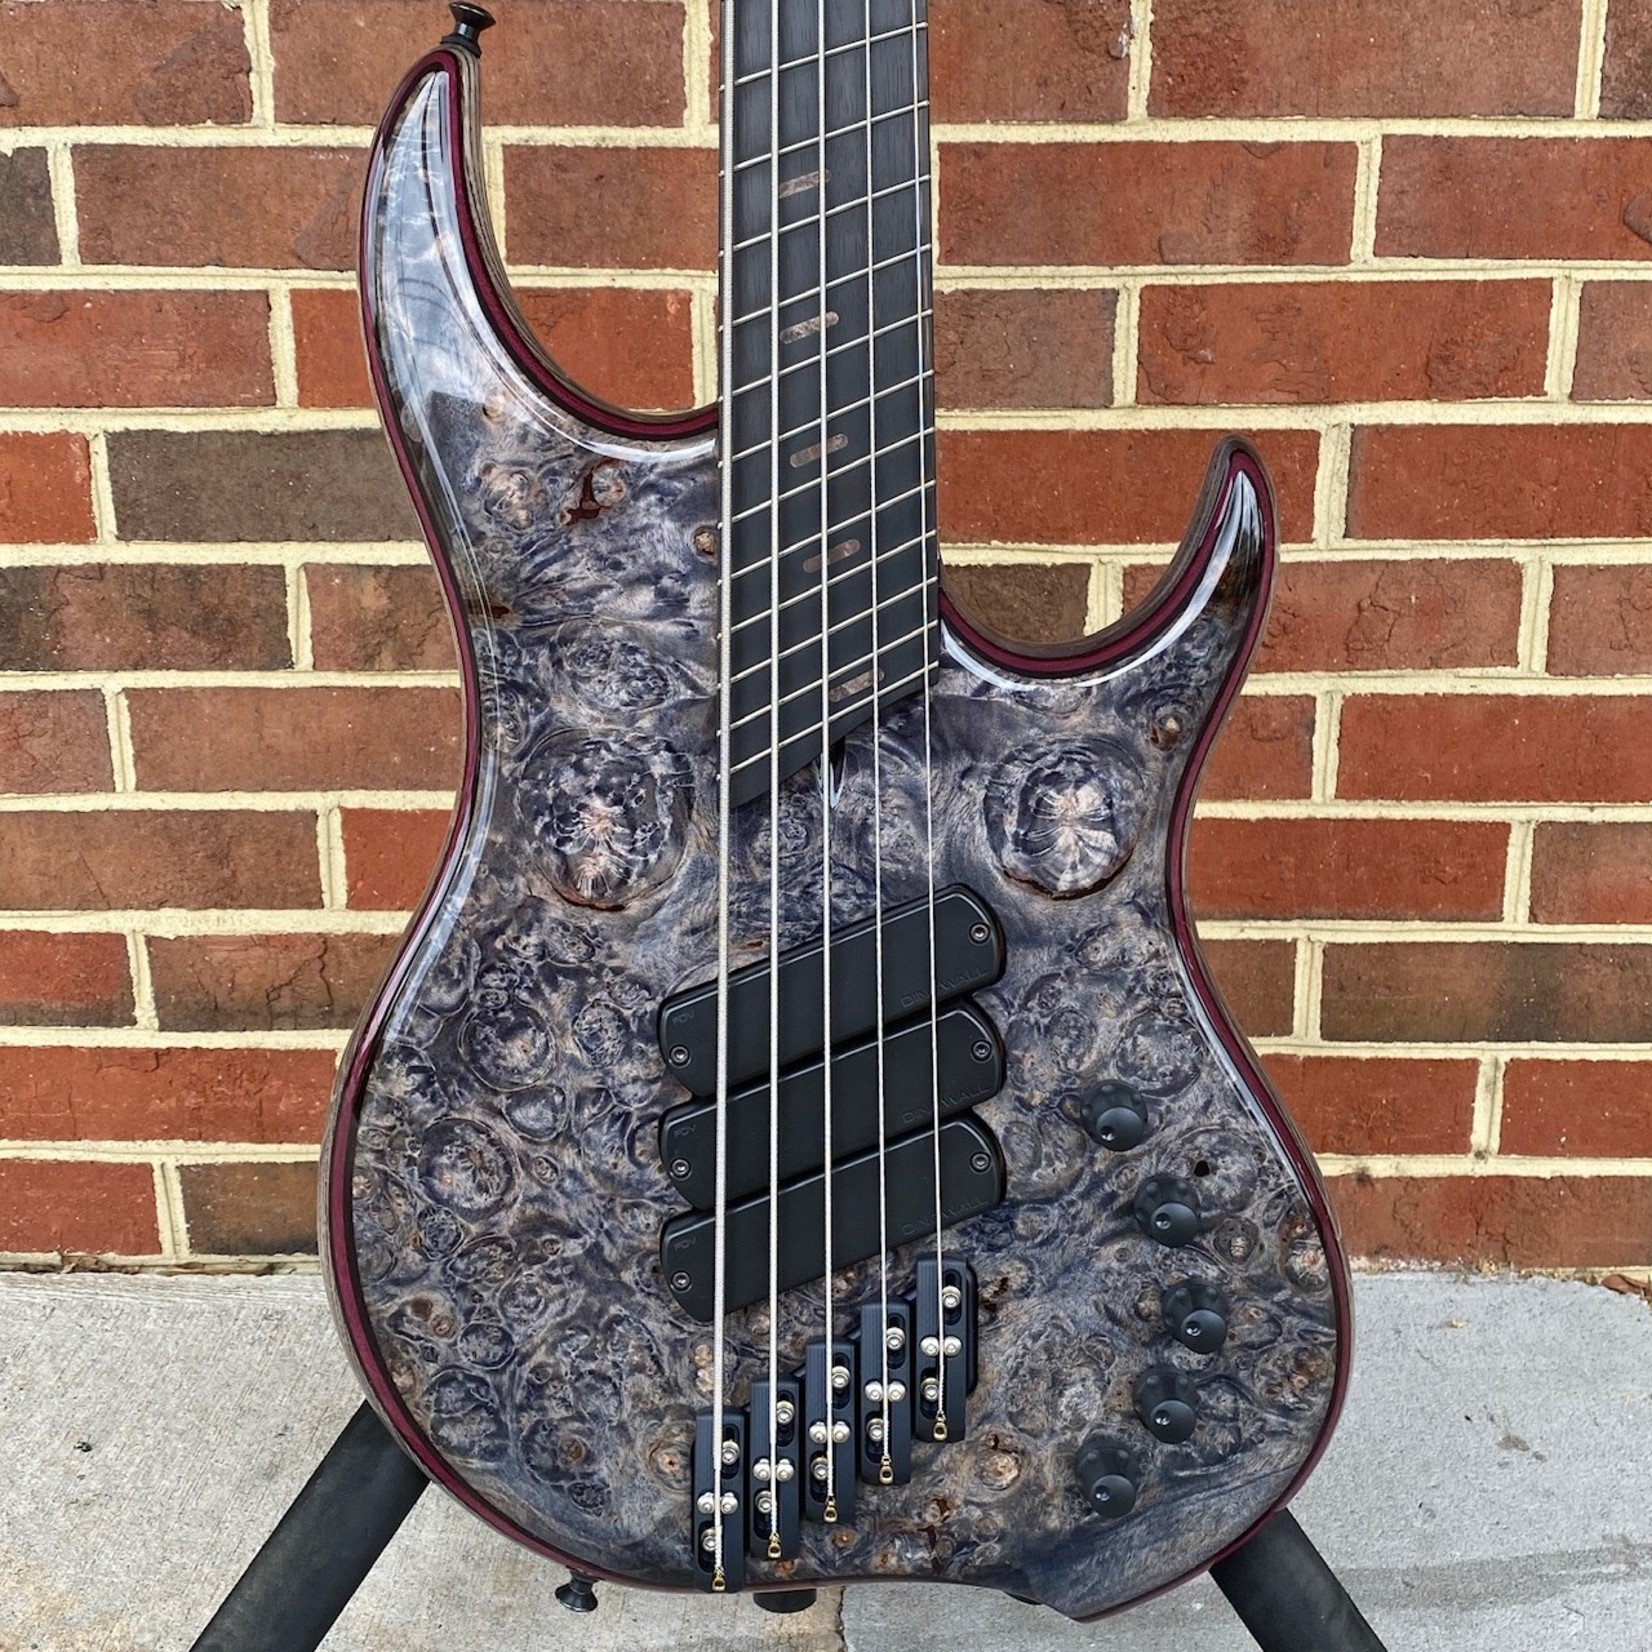 Dingwall Dingwall Z3 Custom 5-String, Dual-Density Swamp Ash Body, Burled Maple Top (#1530), Wenge/Purple Heart/Wenge Contrast Layer, Pre Bleached Trans Black Finish, Darkglass 3-band preamp, Wenge Neck with Ebony Fretboard, Matching Wood Speedo Bars